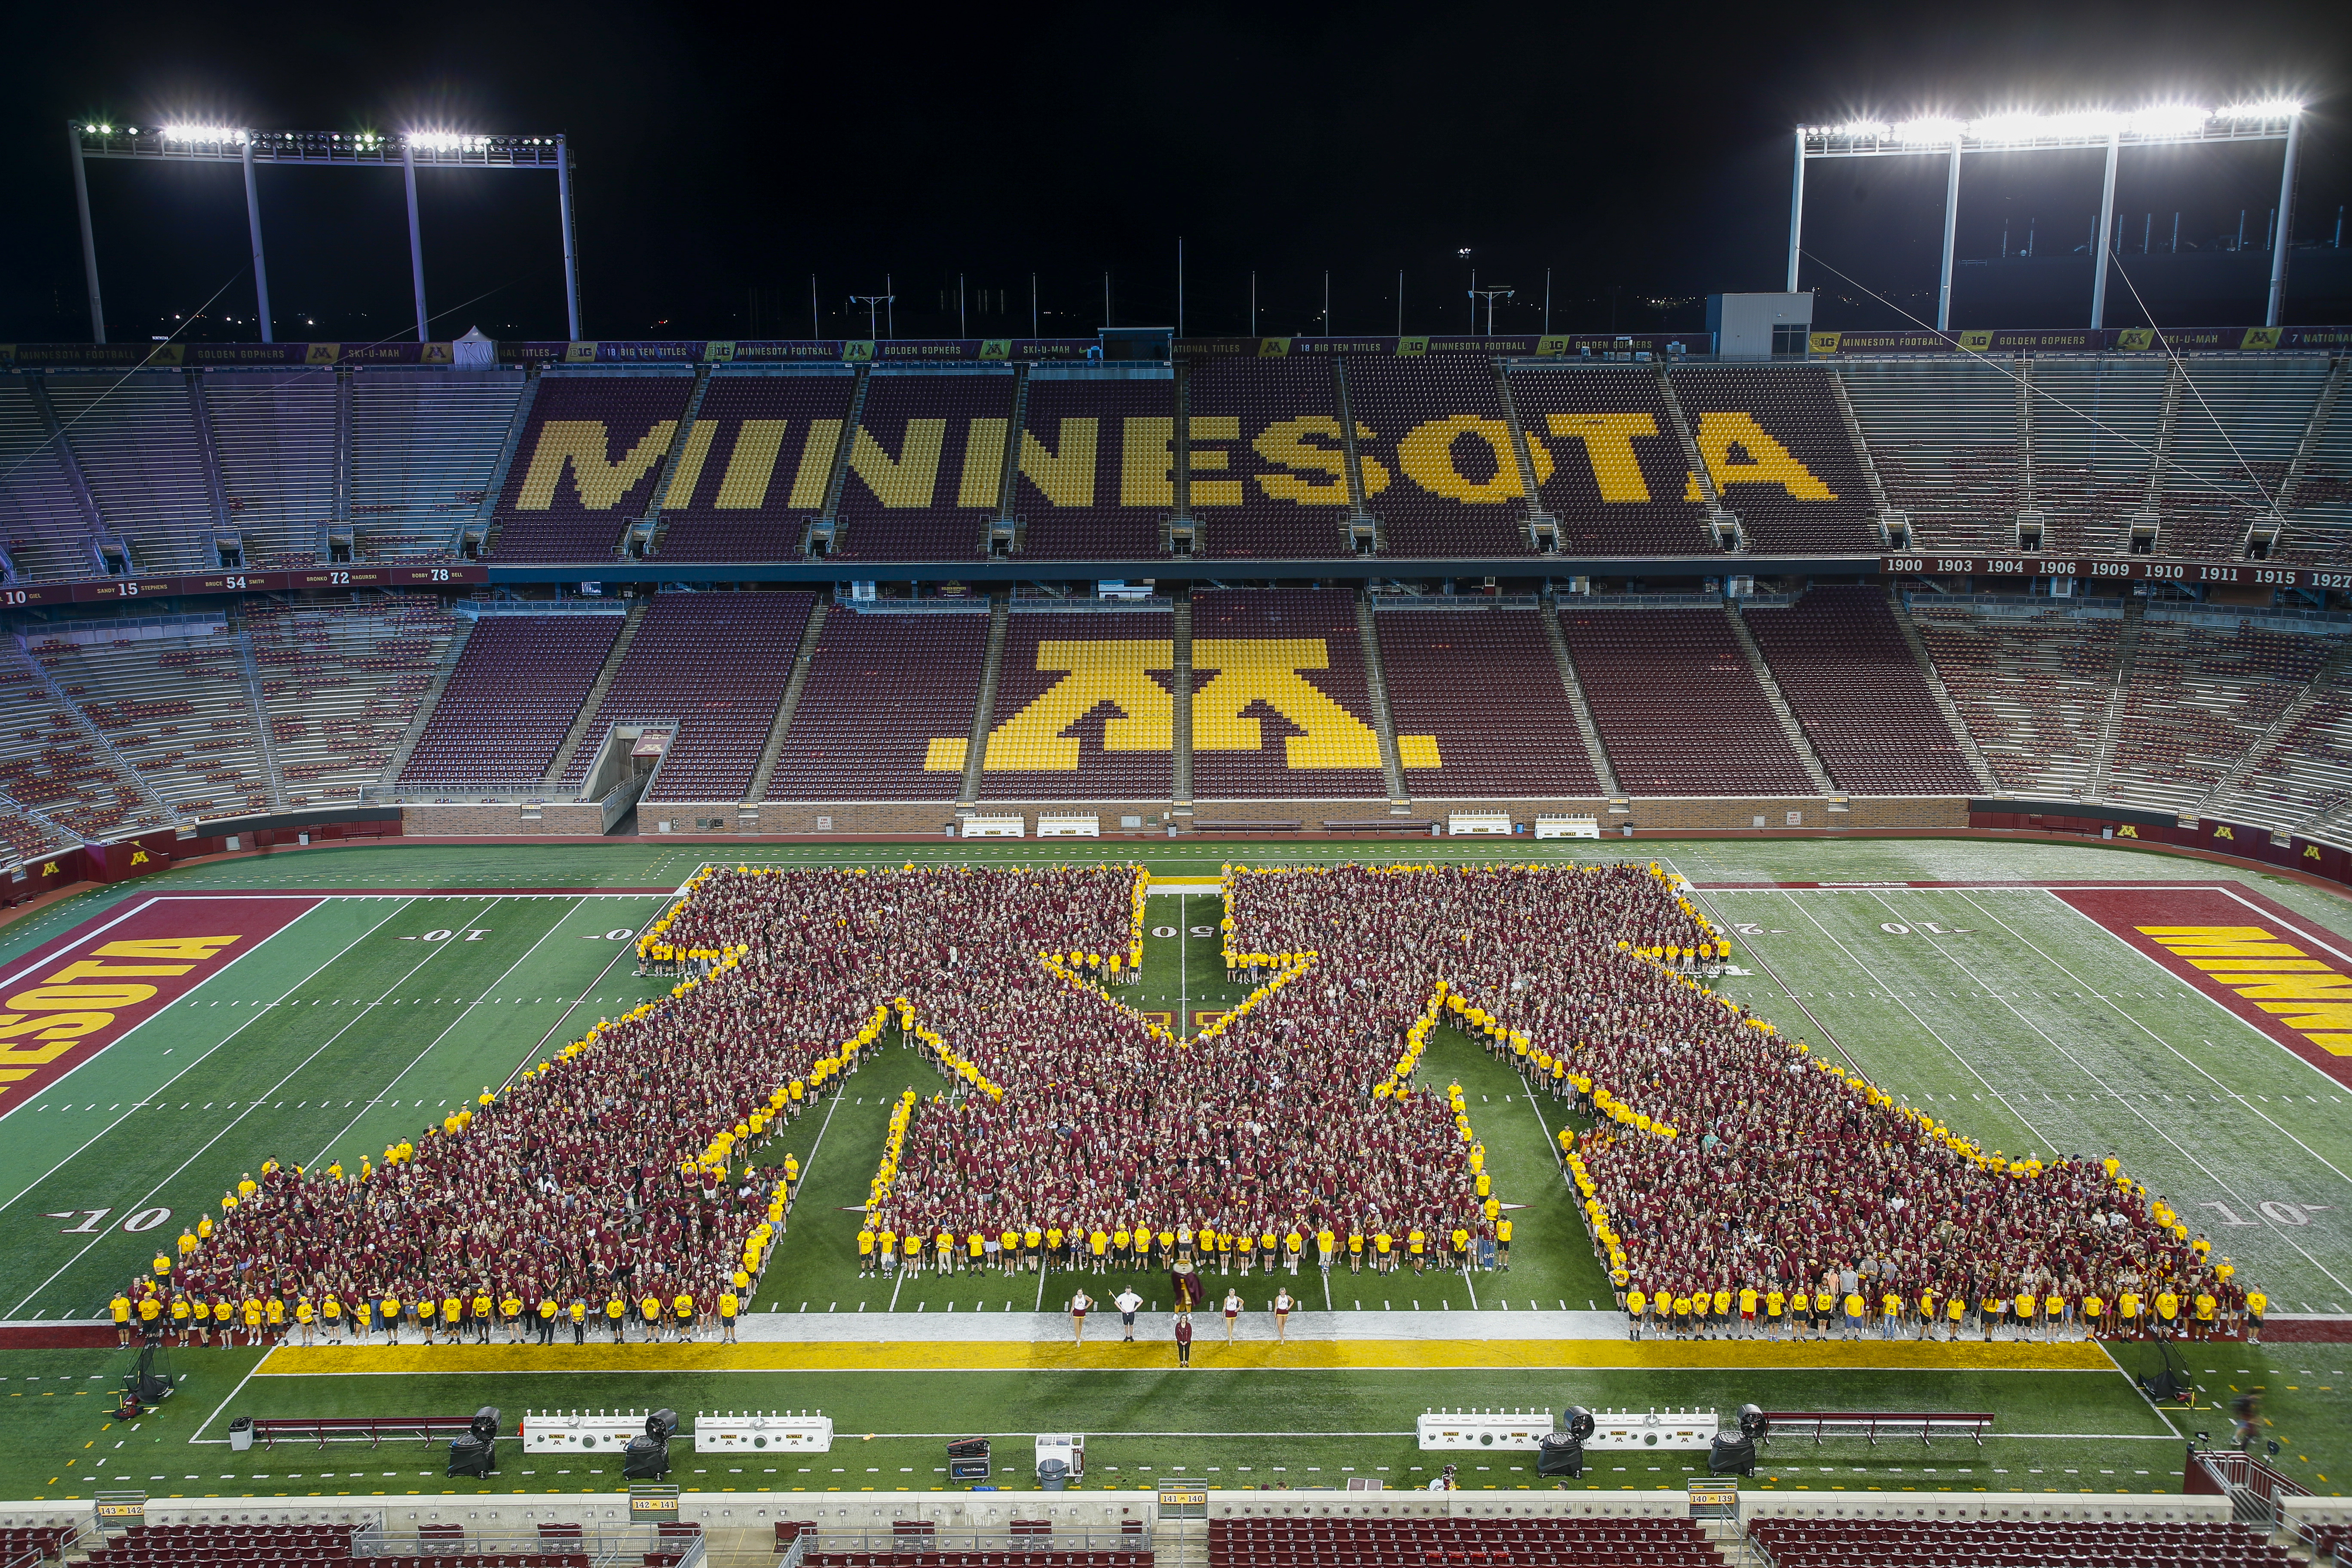 An aerial shot shows approximately 6,700 first year students standing together on the Huntington Bank Stadium football field, forming the Block M logo that represents the U of M